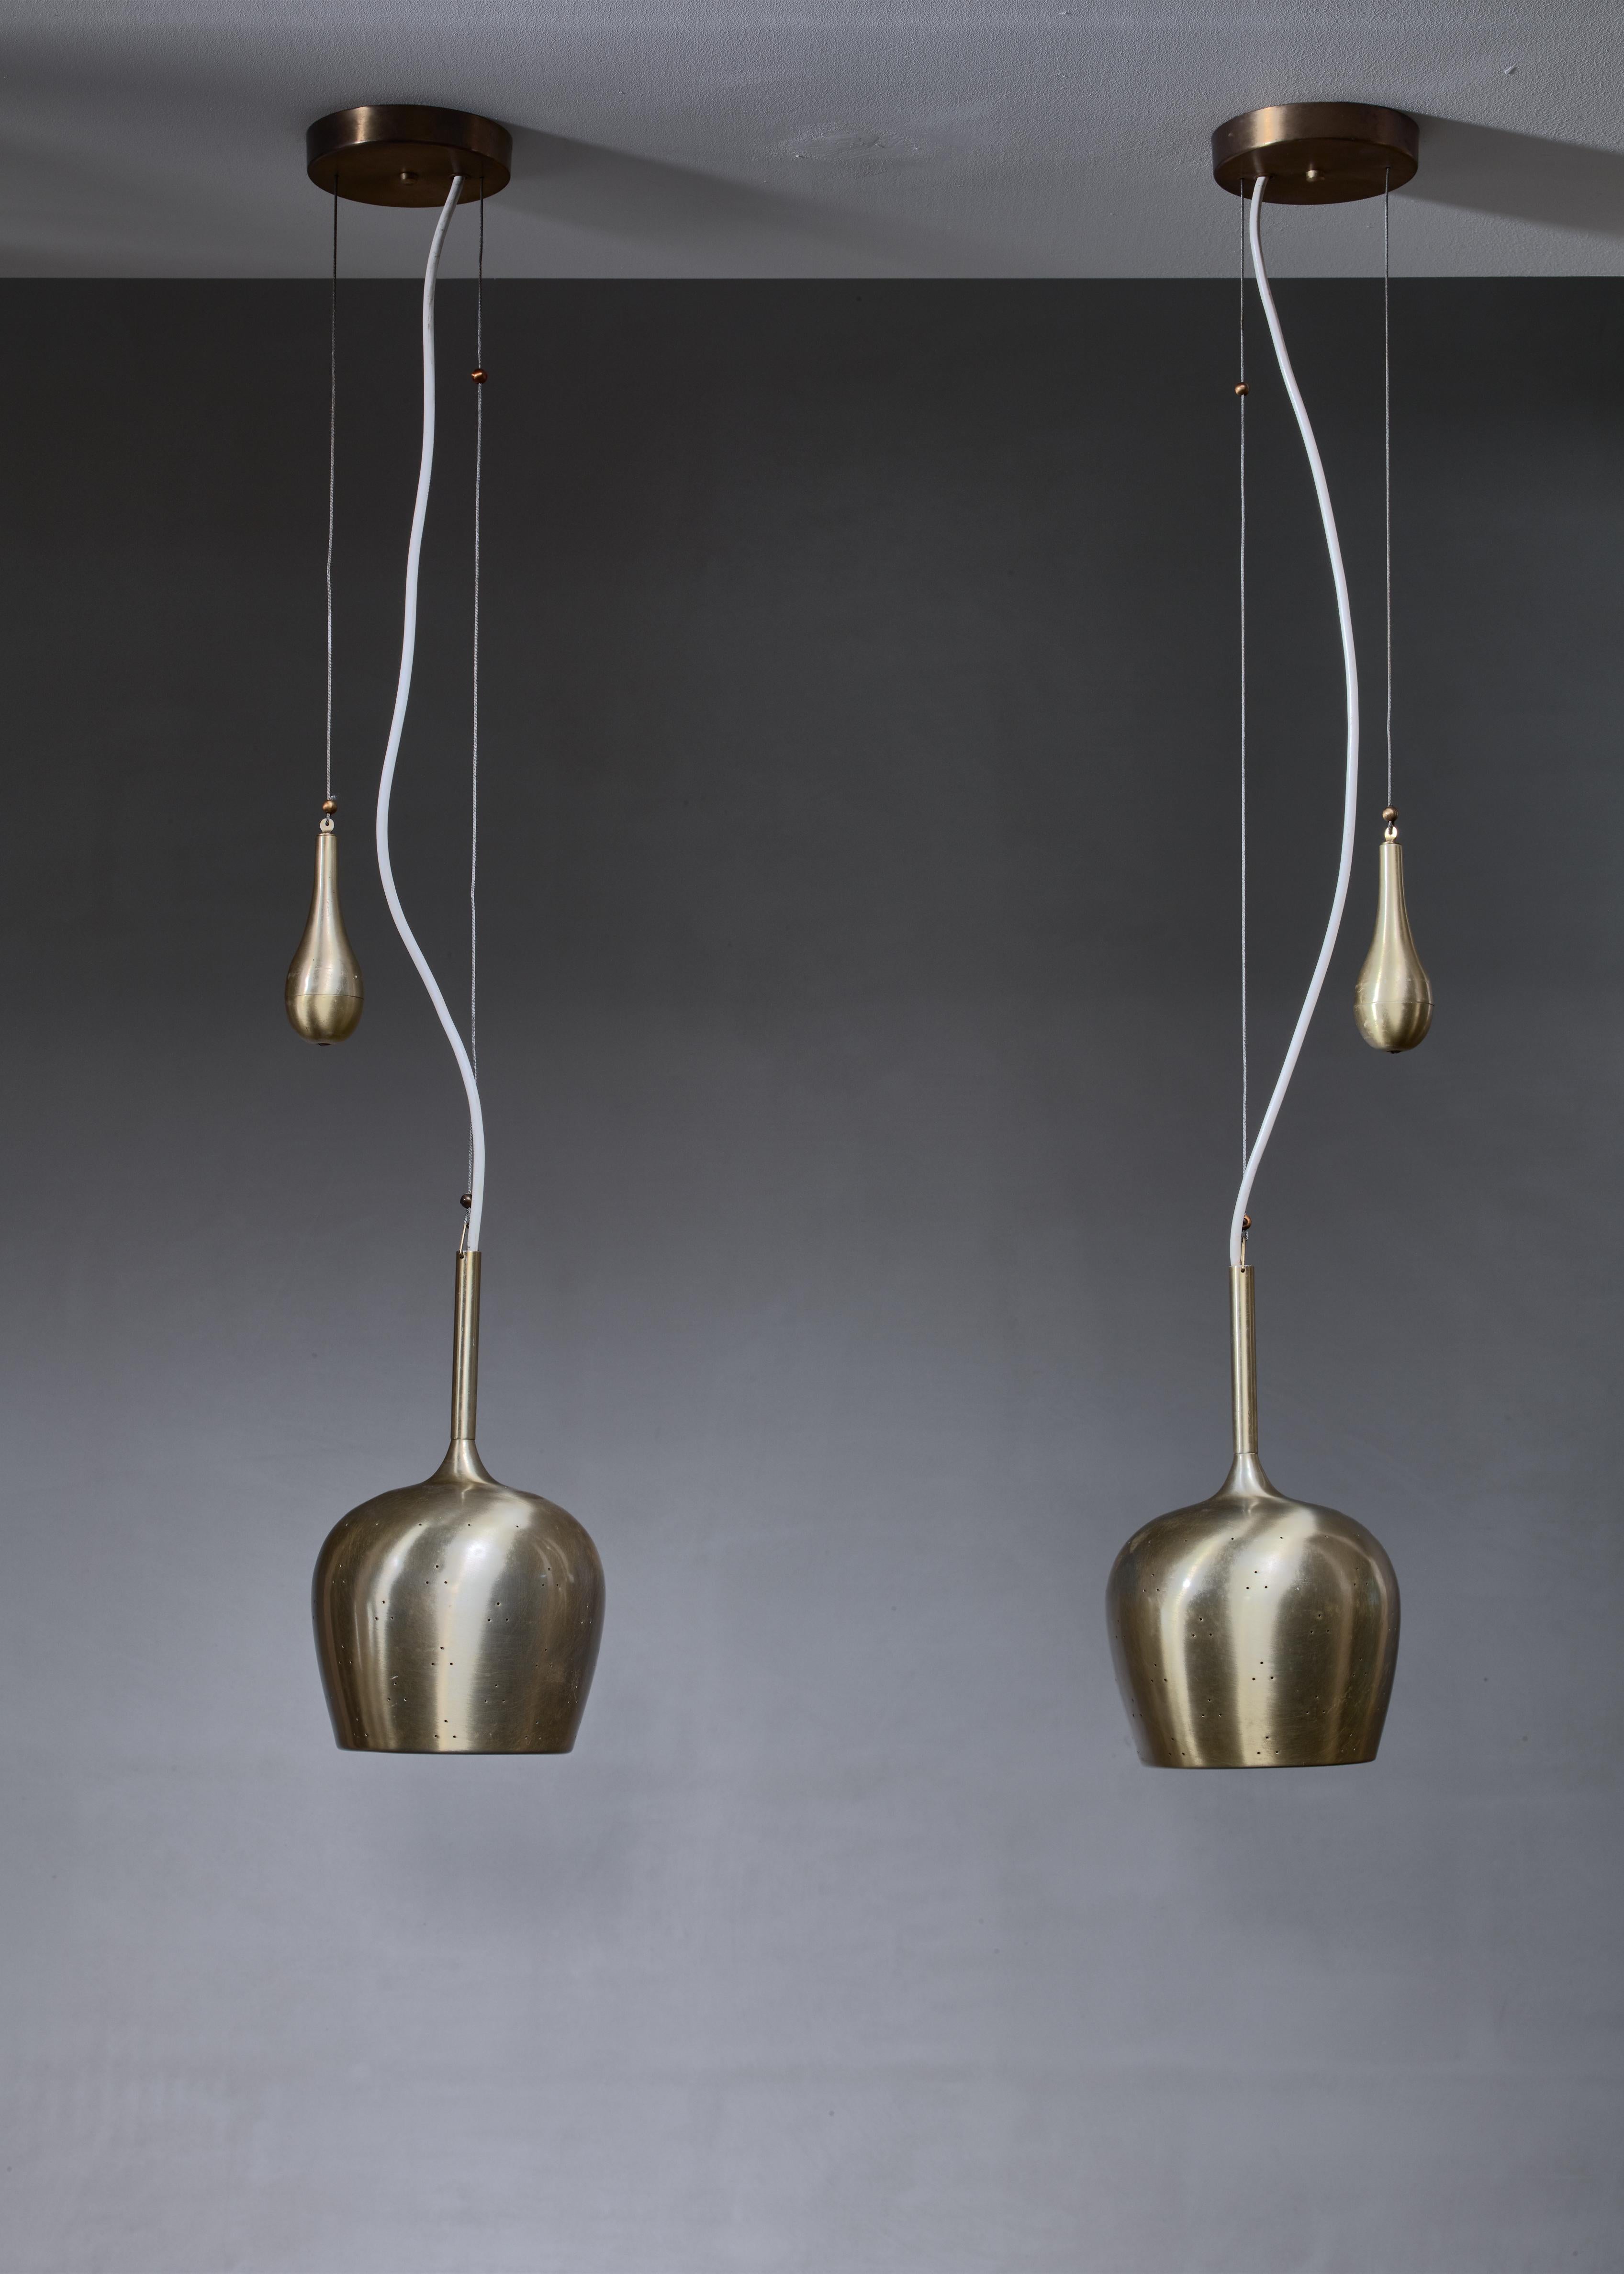 Scandinavian Modern Pair of Paavo Tynell Bell Chandeliers with Counterweight For Sale